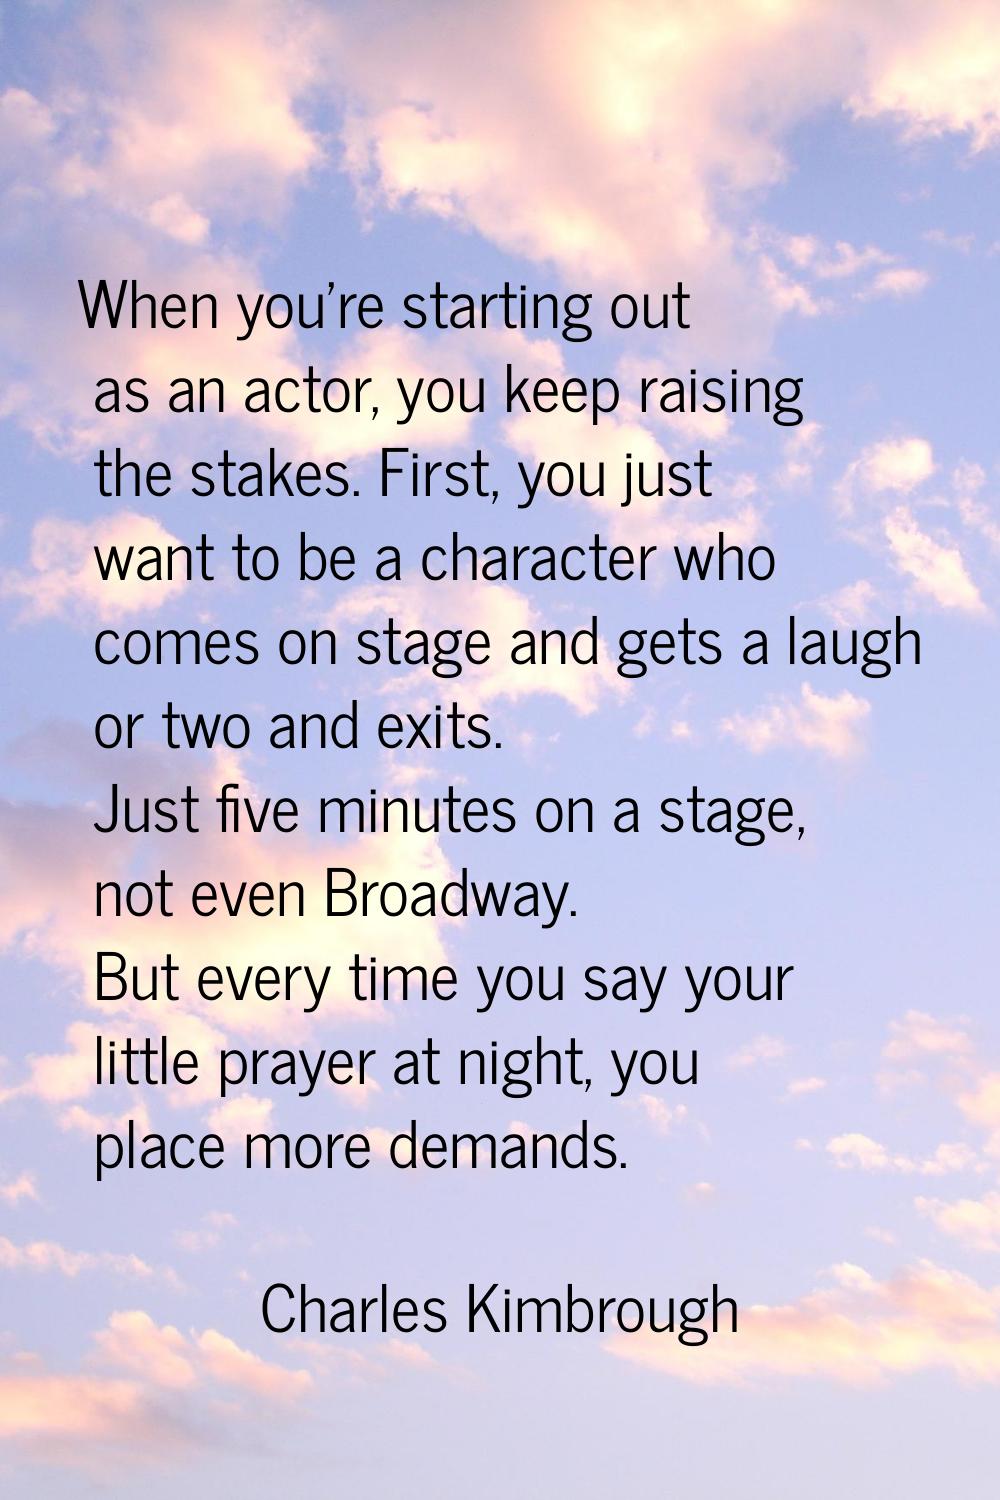 When you're starting out as an actor, you keep raising the stakes. First, you just want to be a cha